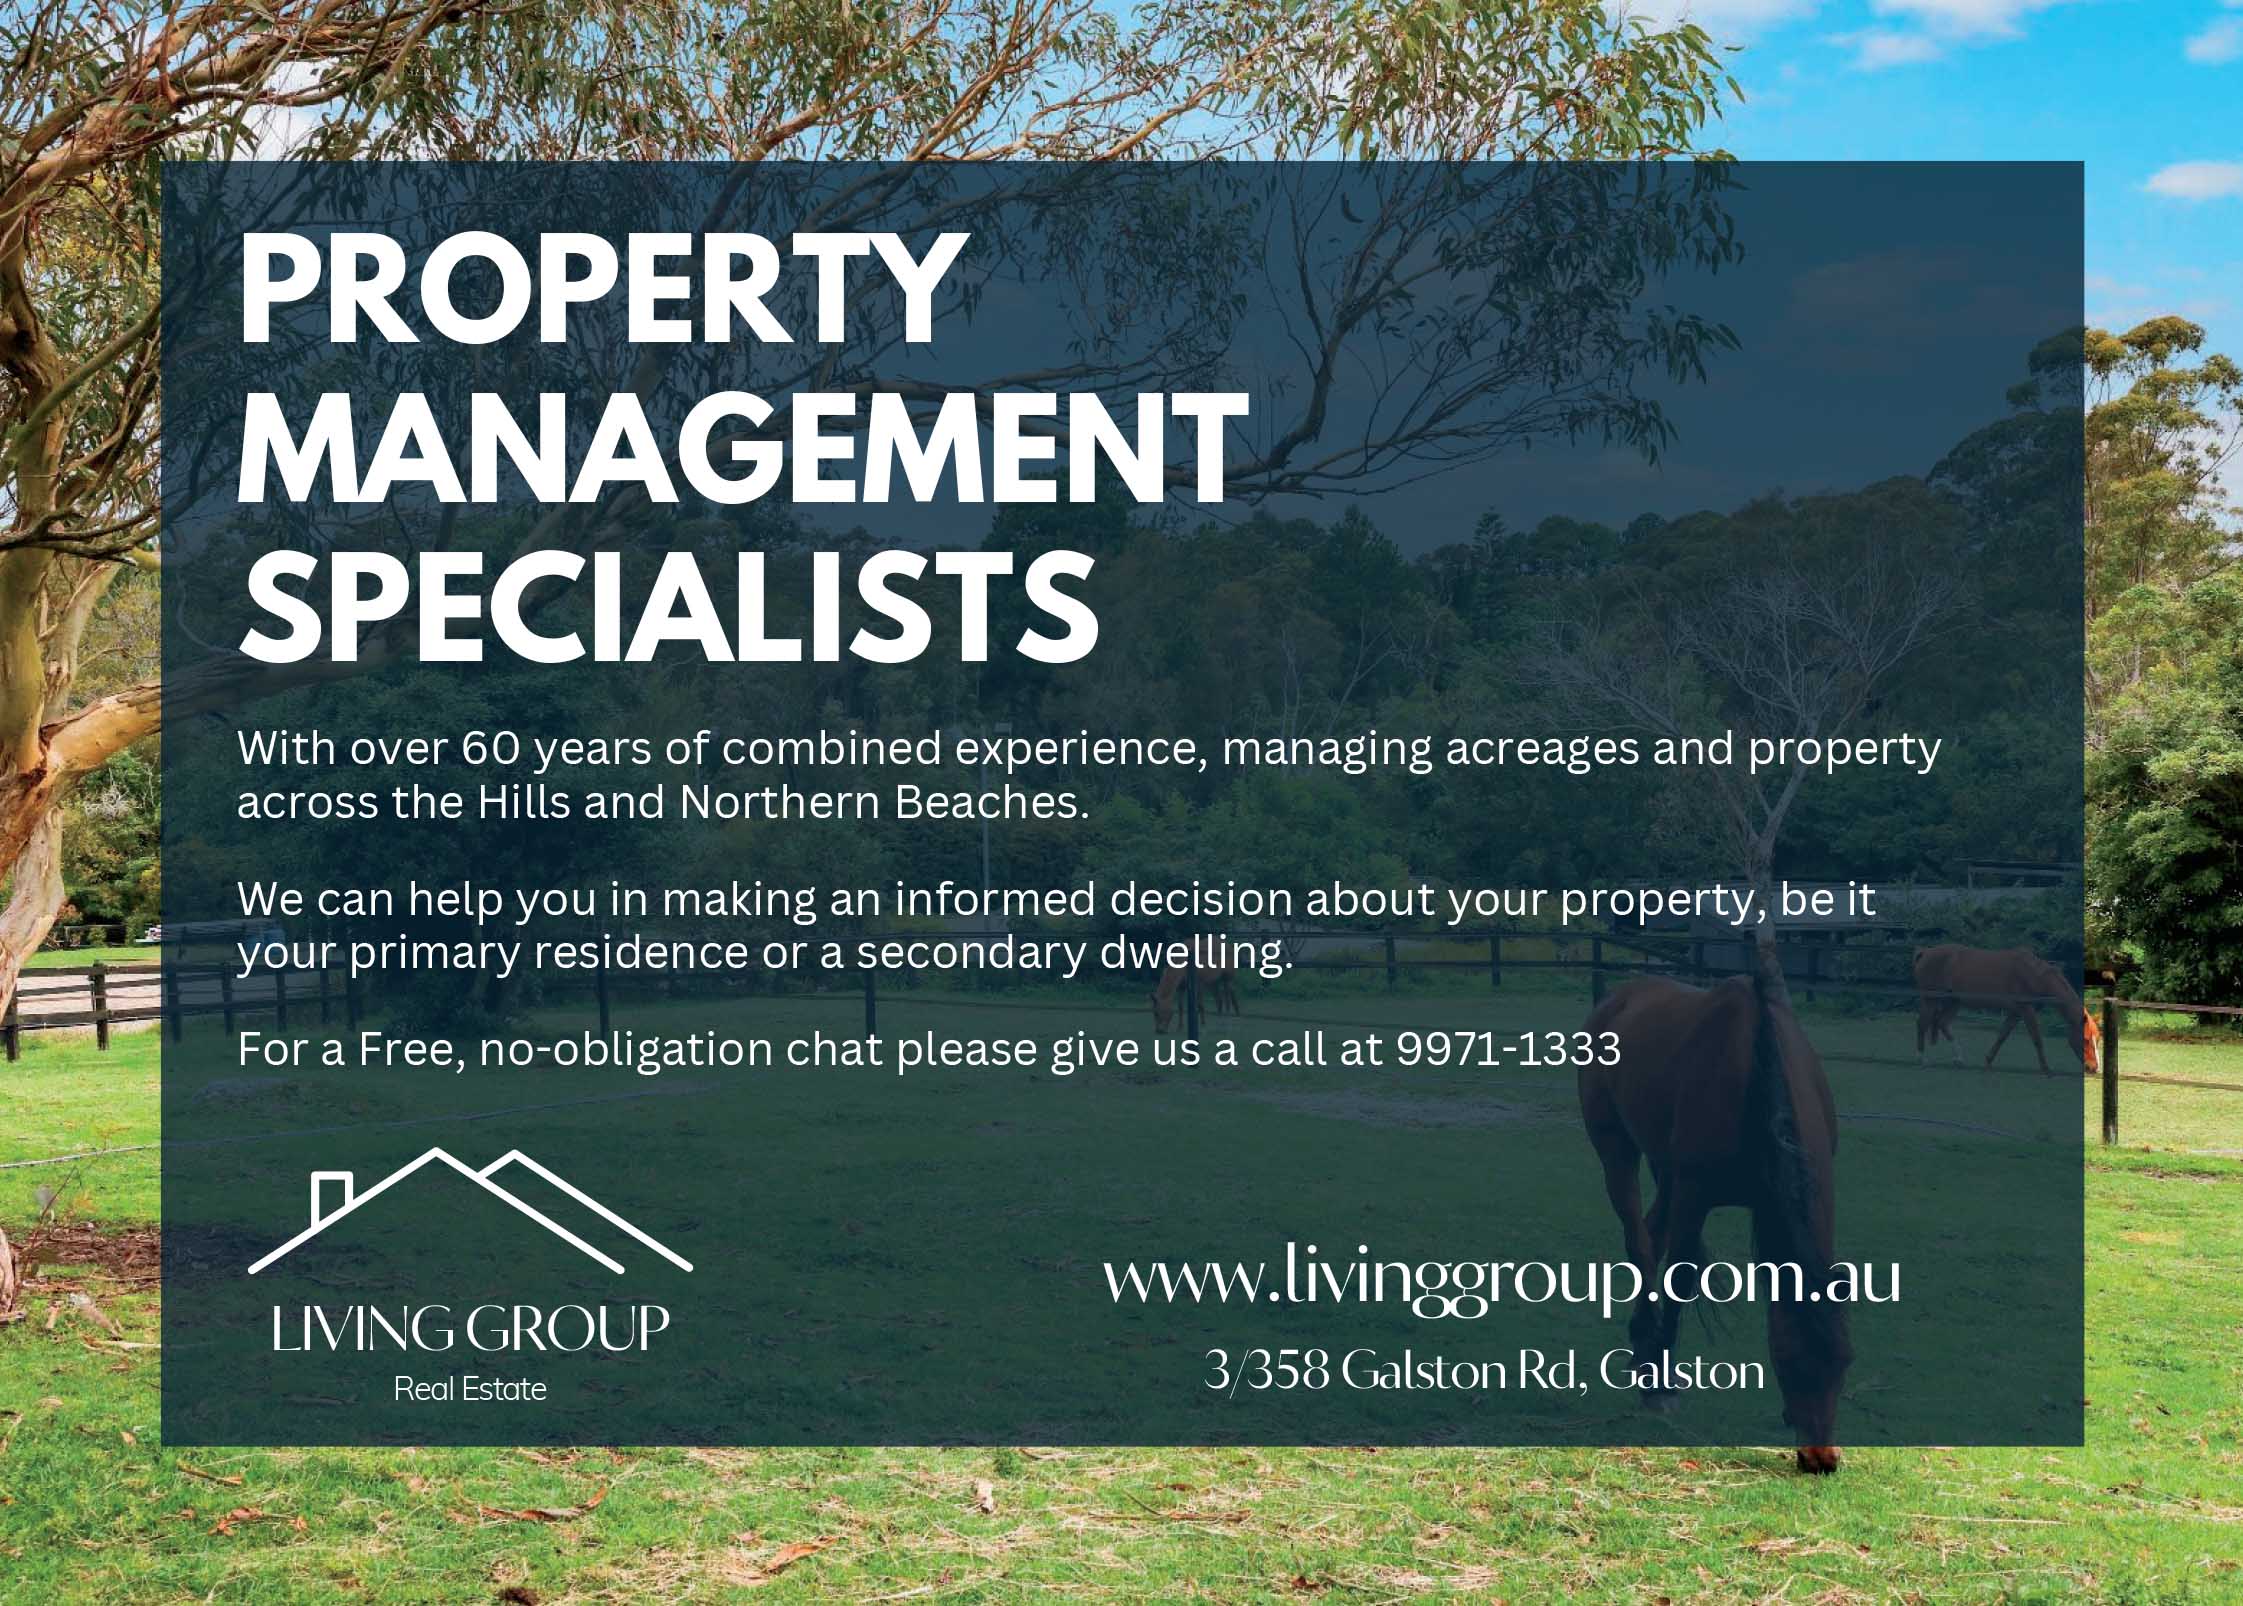 We Are Moving In – Your Trusted Property Management Experts